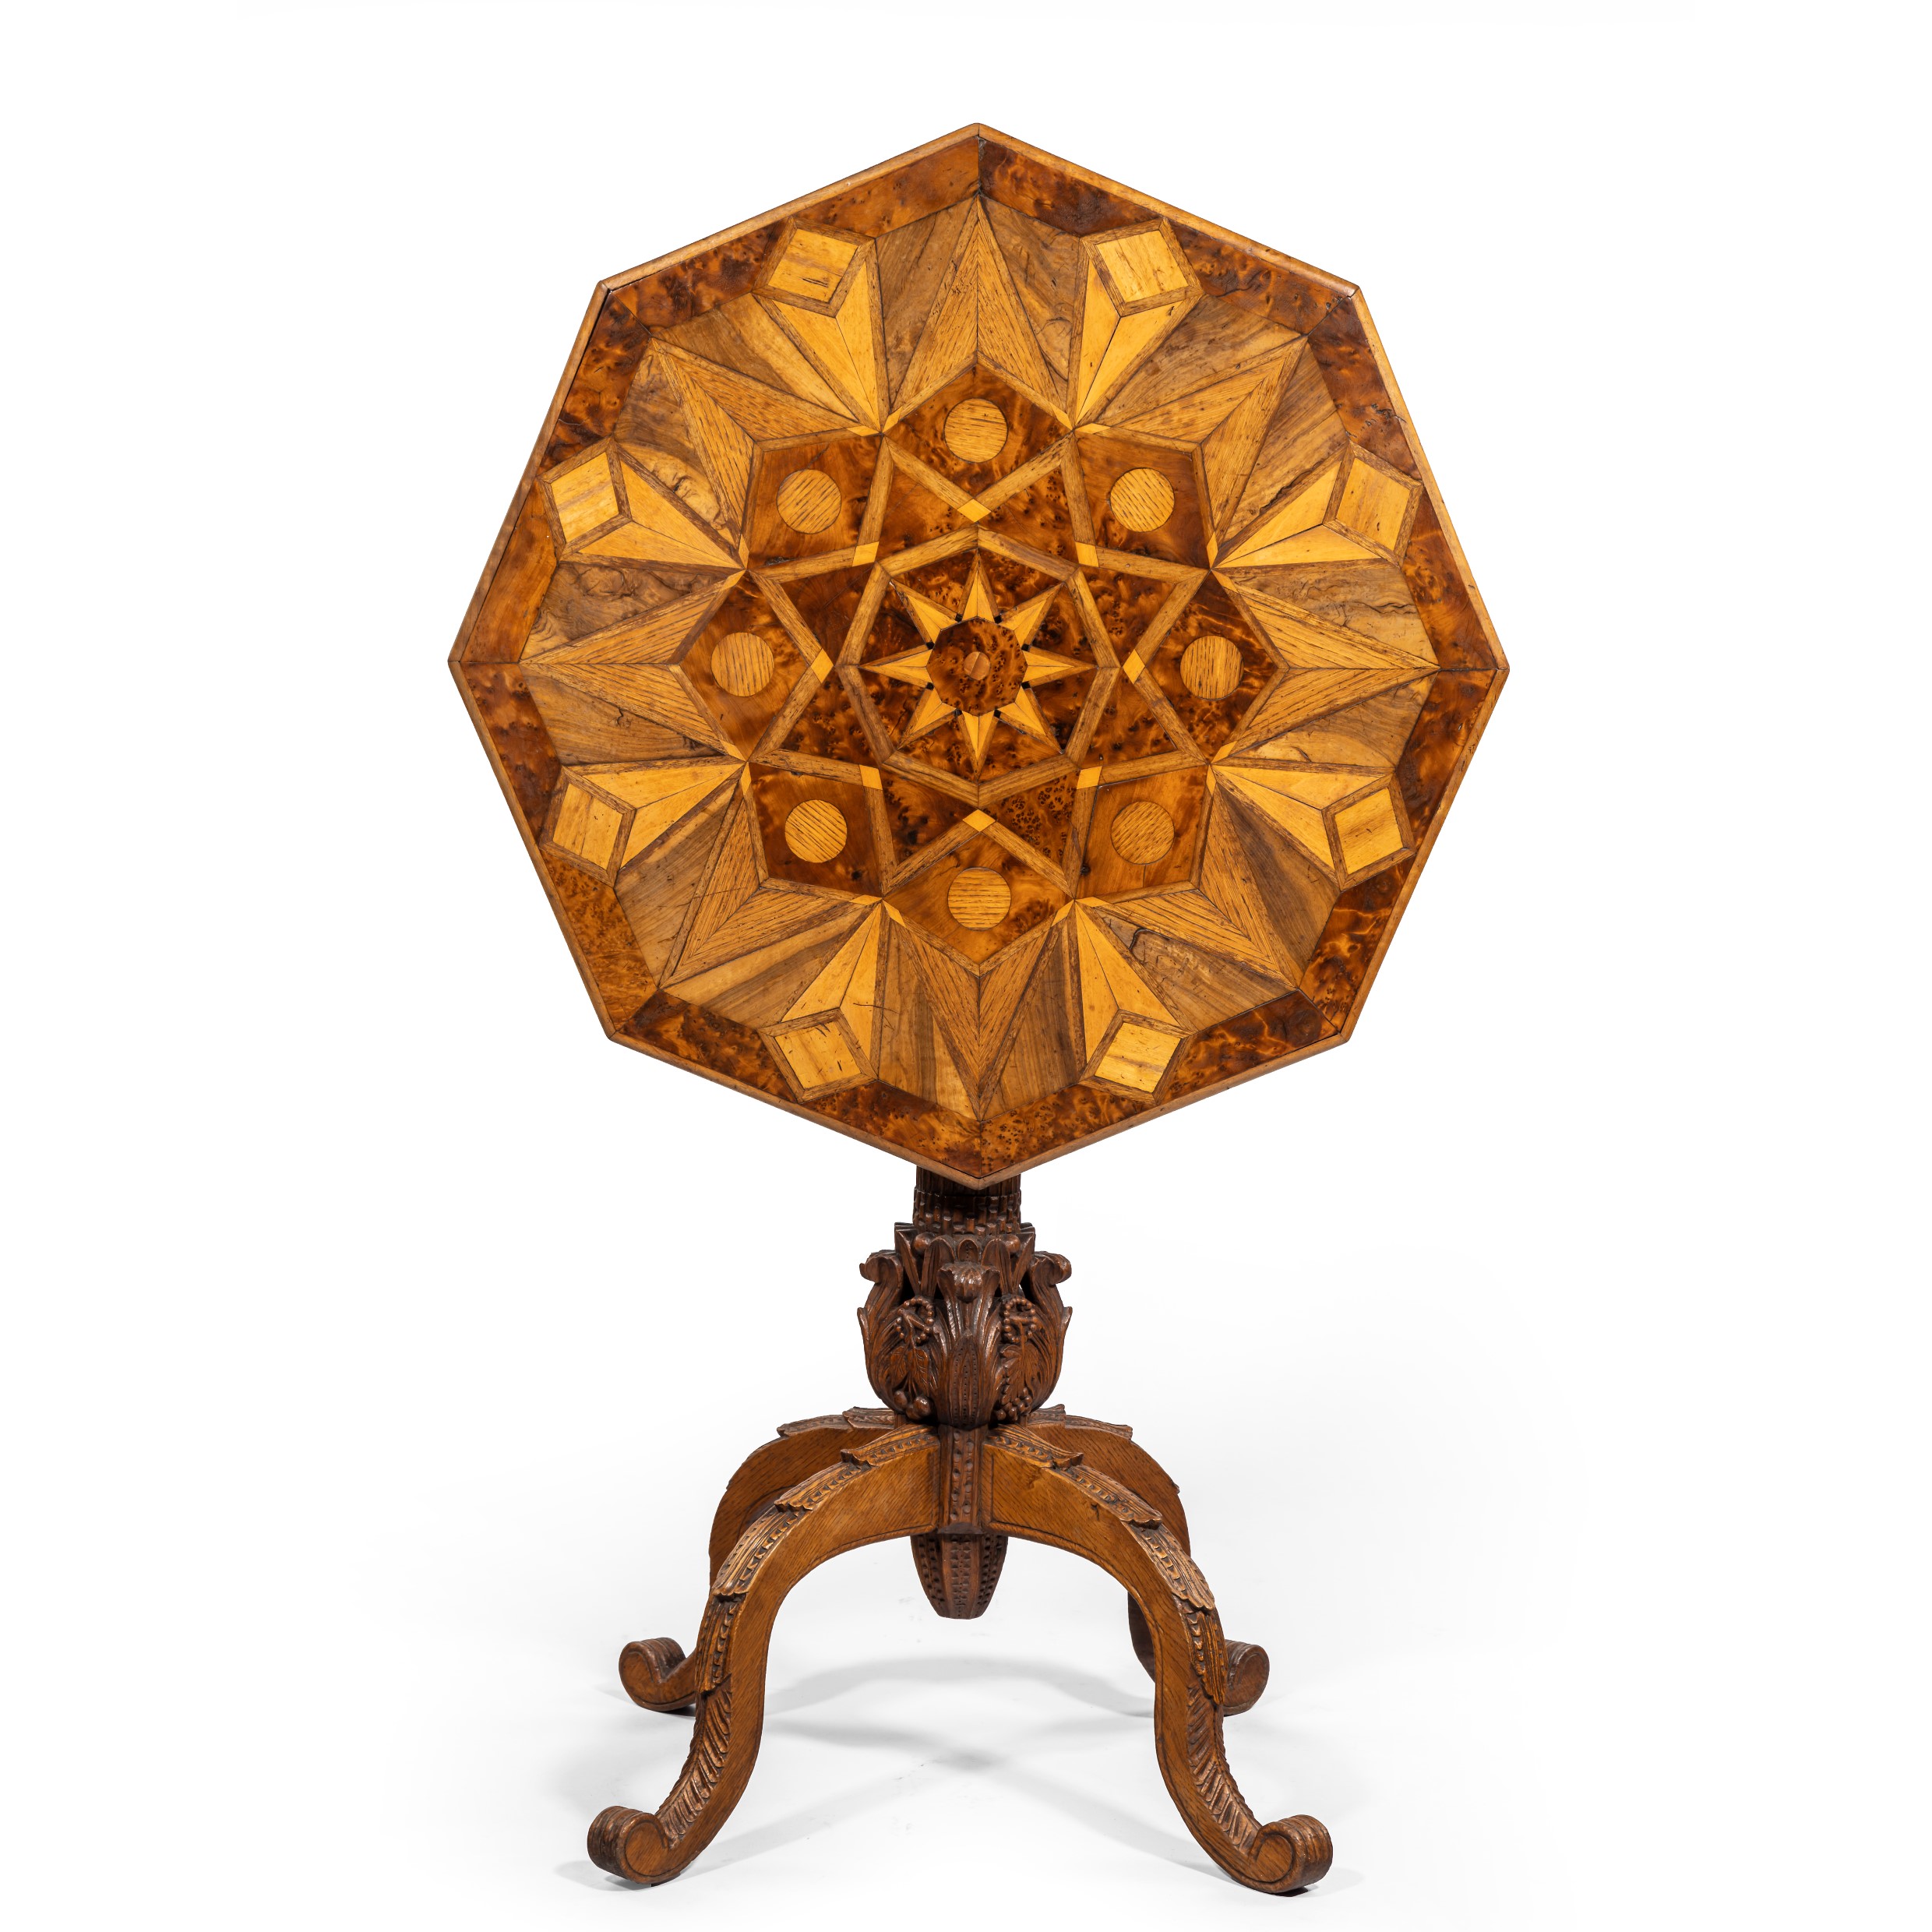 An octagonal indigenous specimen wood marquetry table, the tilt top inlaid on both sides with triangles and diamonds in an overall star design, the woods include yew, oak and elm, on a carved classical column base with four cabriole legs. British, circa 1860.